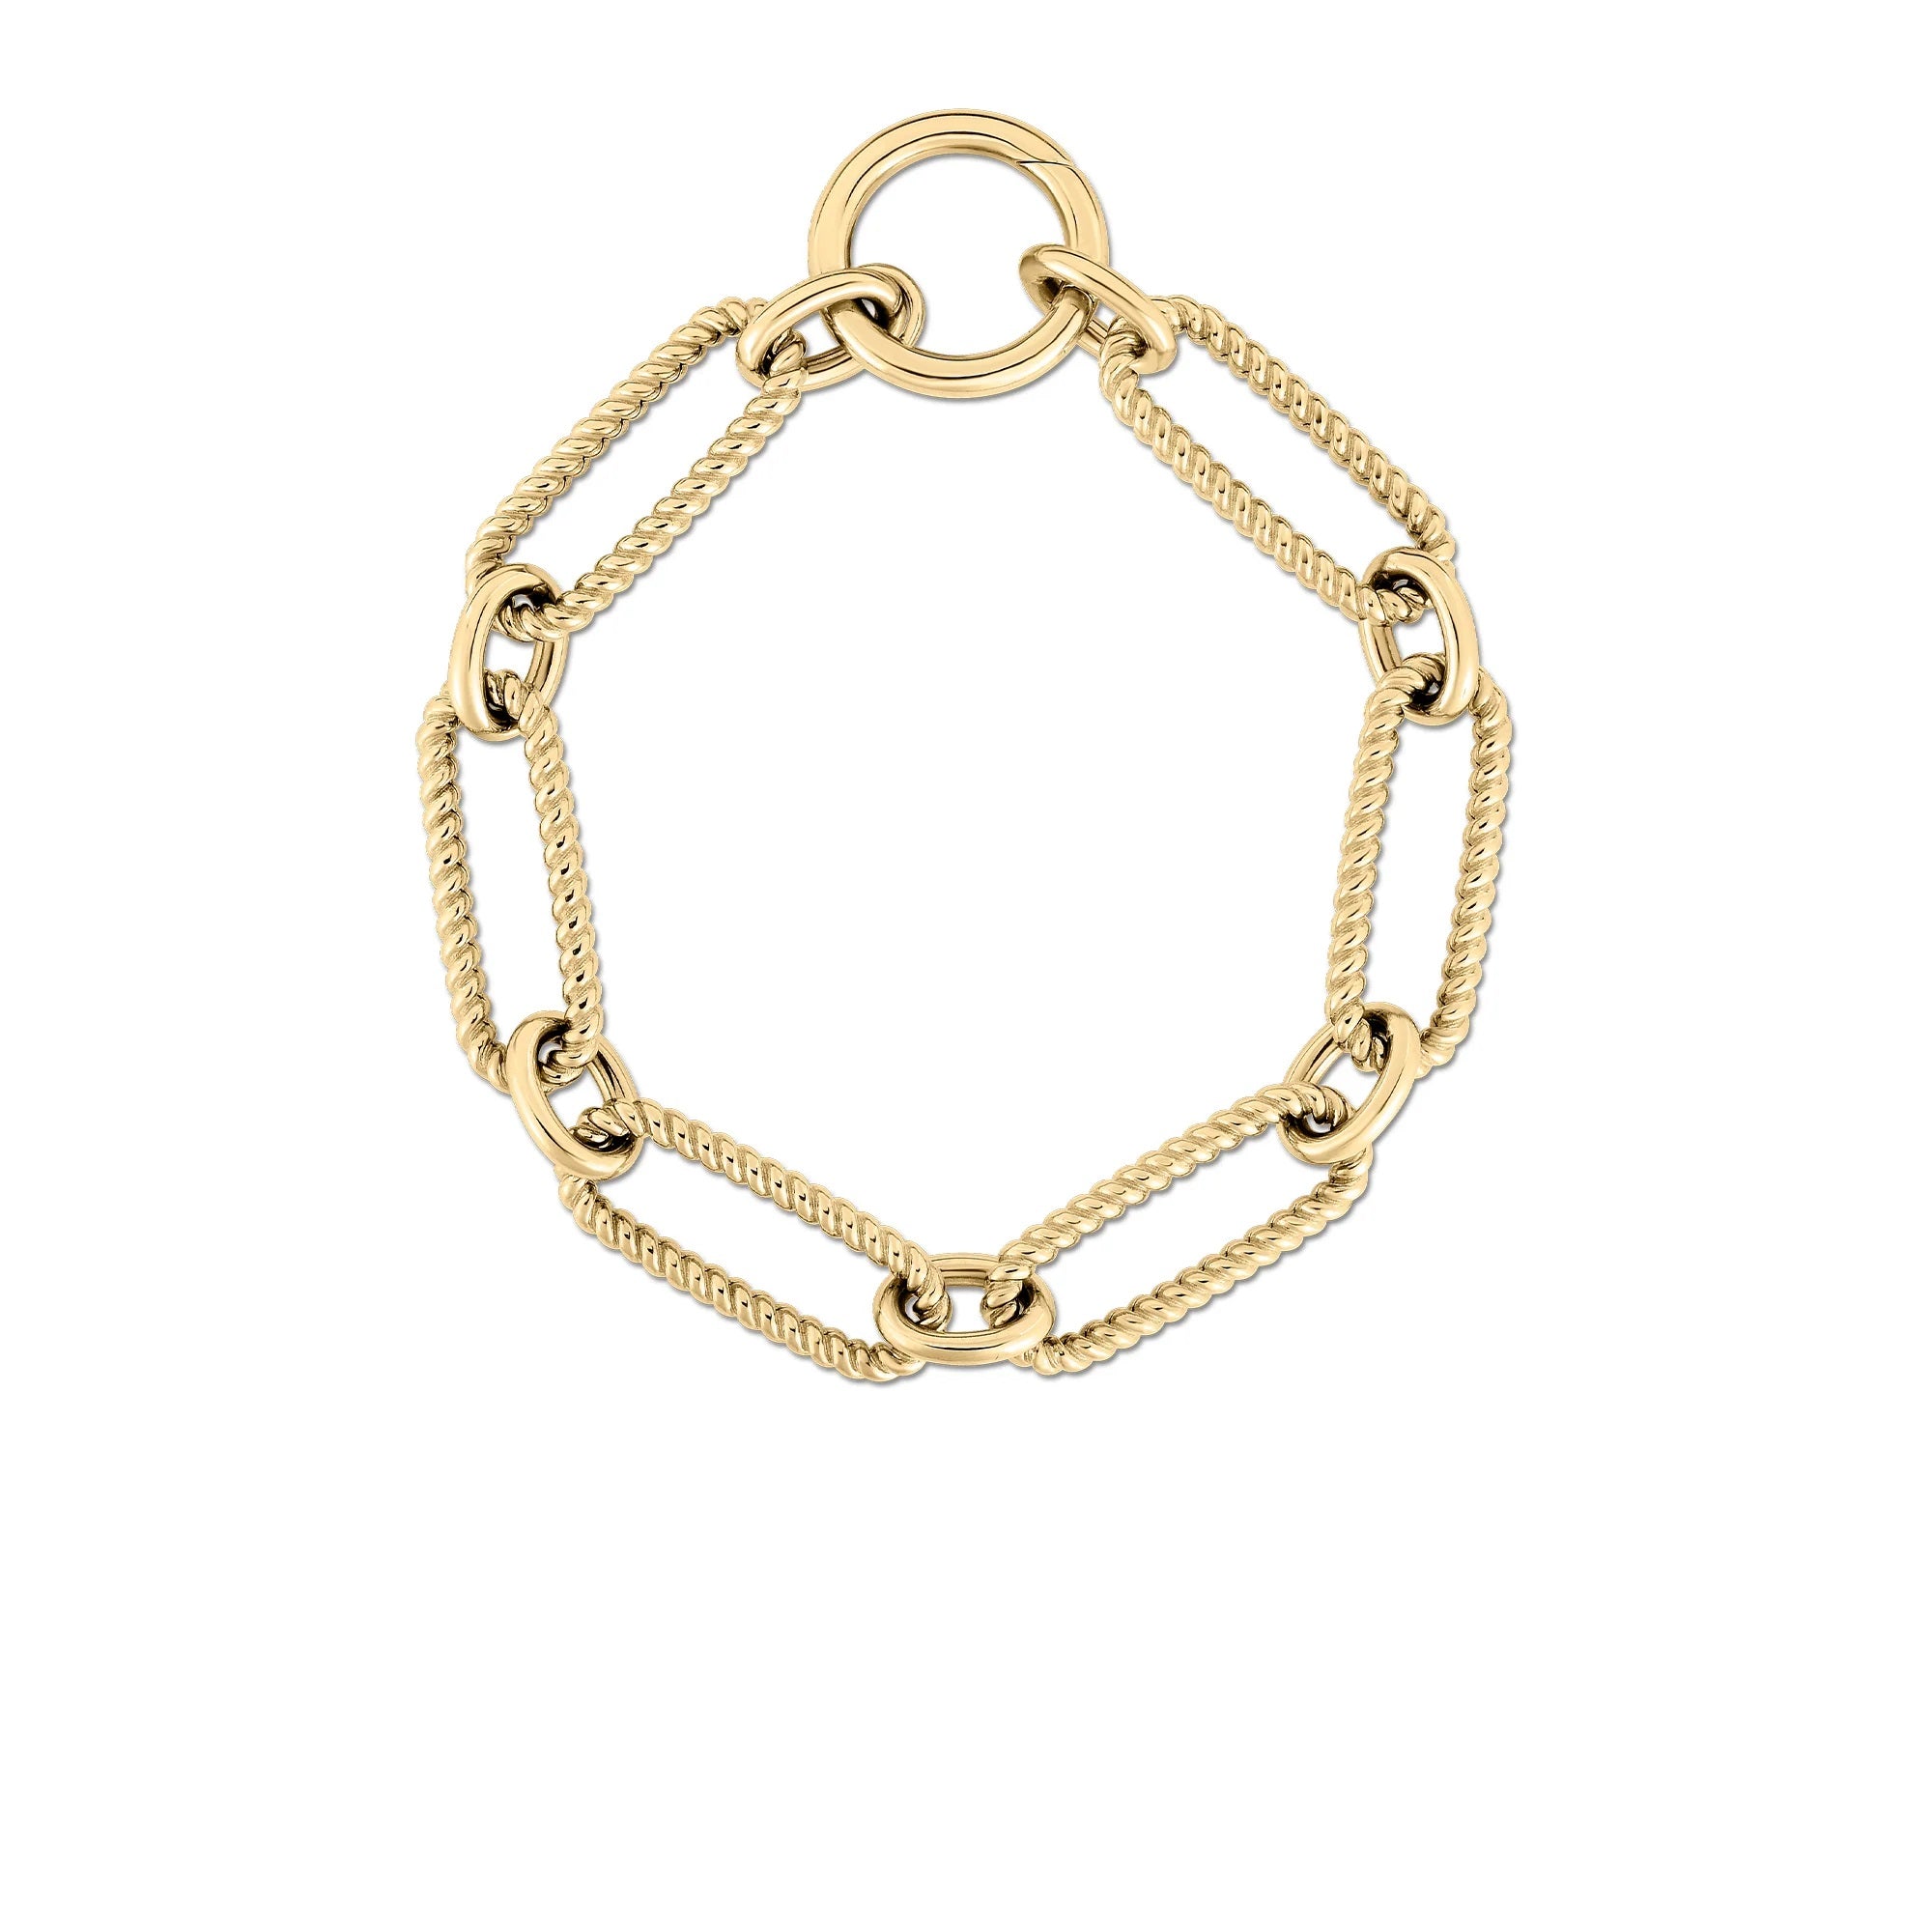 18K YELLOW GOLD FLUTED ORO LINK BRACELET